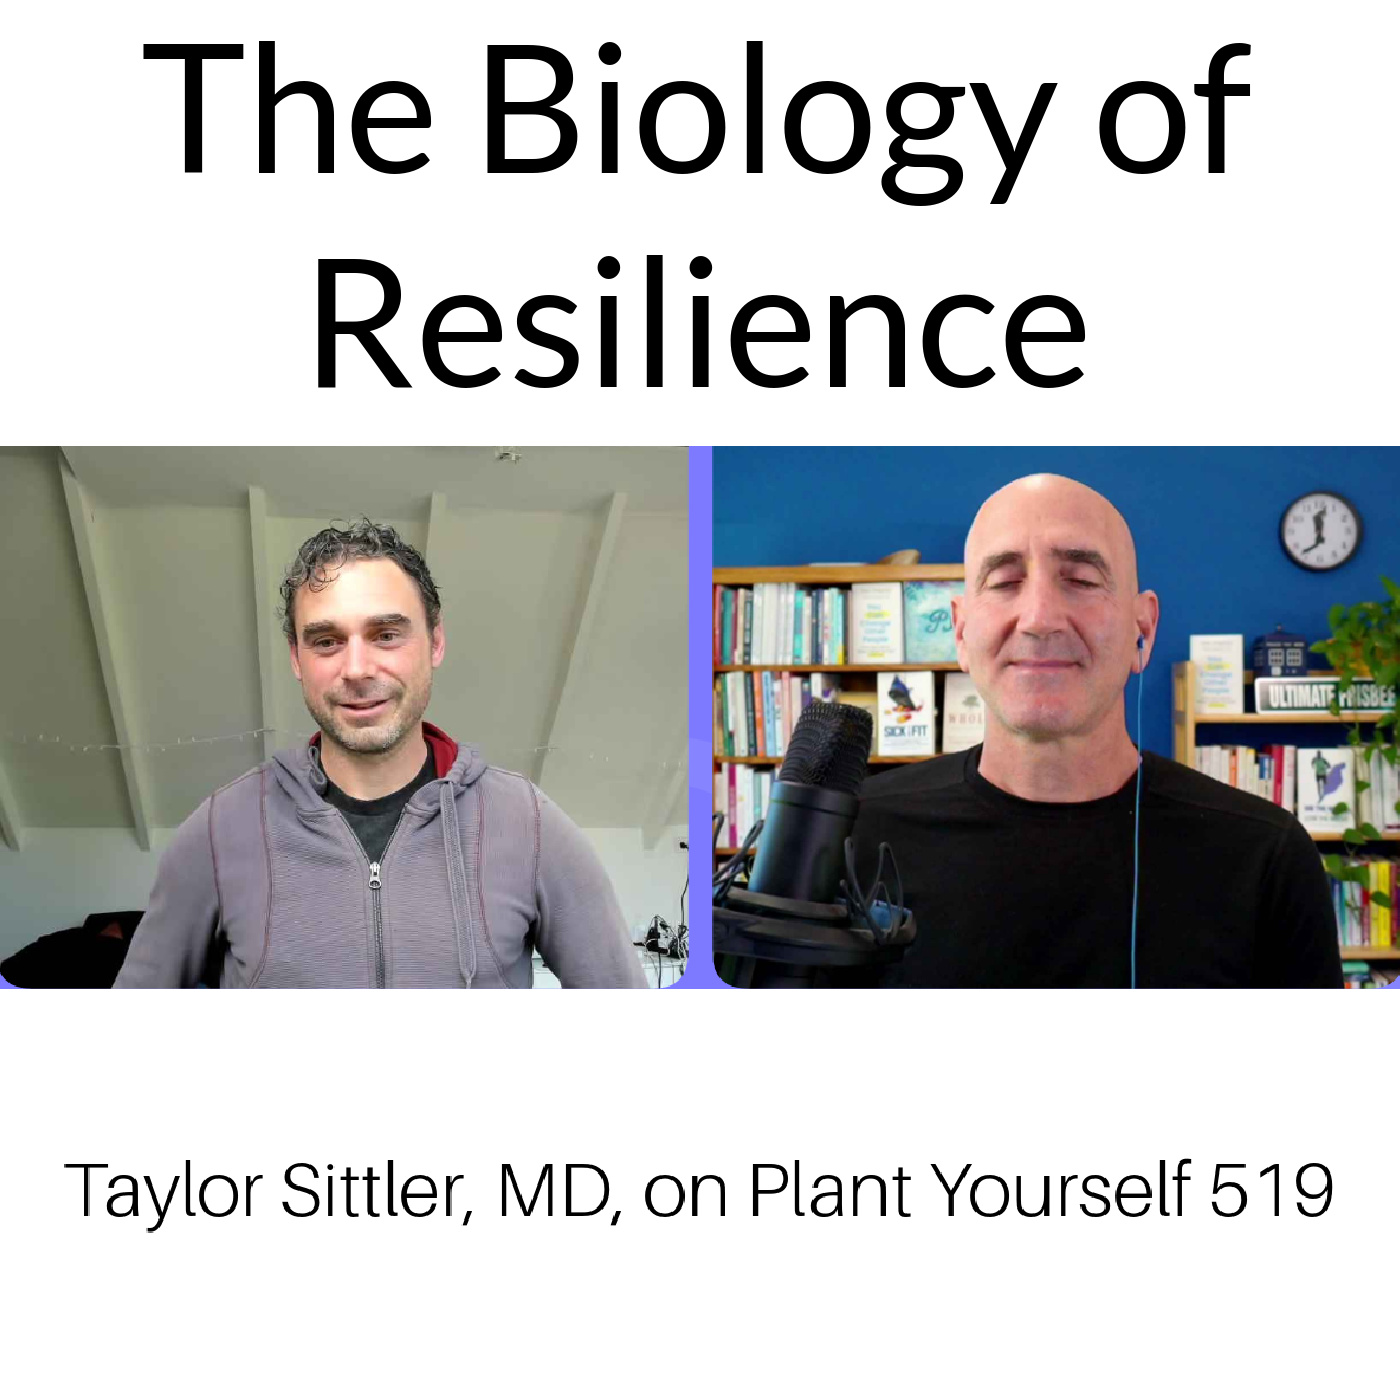 The Biology of Resilience: Taylor Sittler, MD, on PYP 519